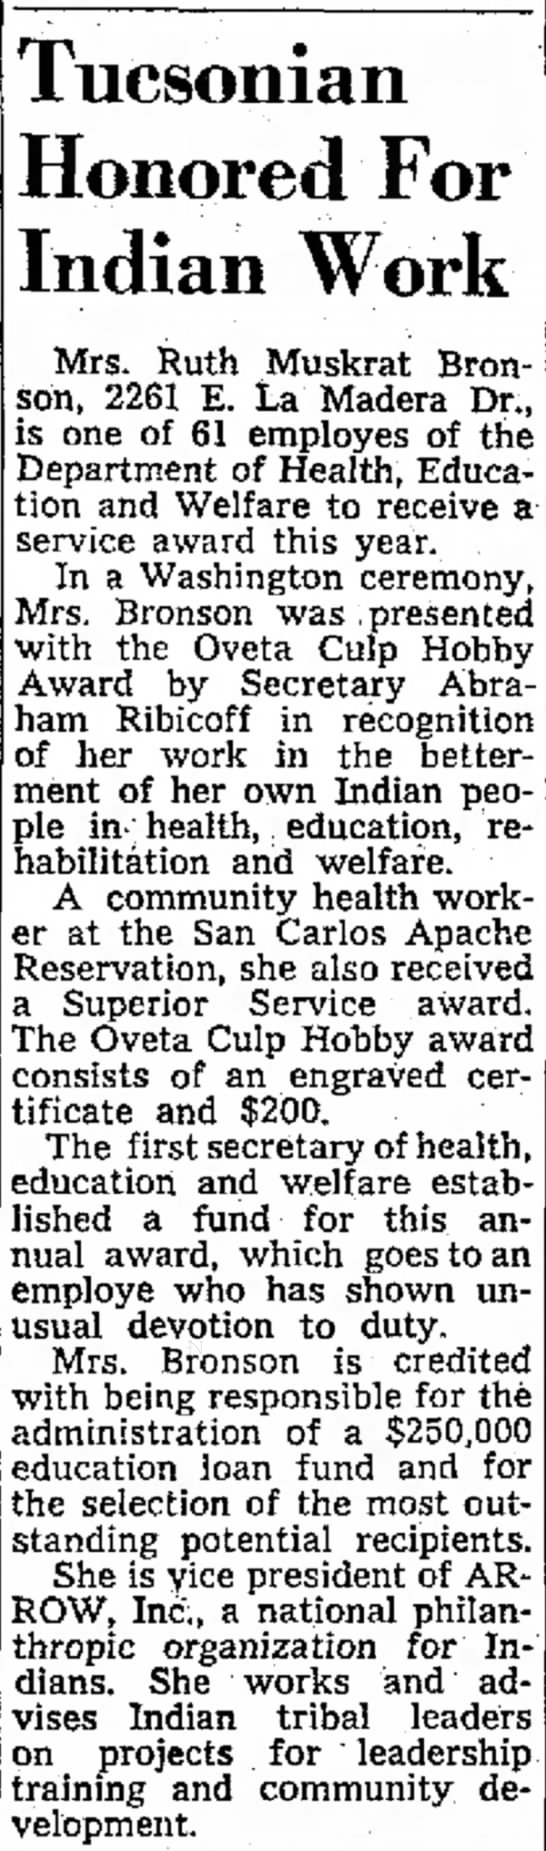 Tucsonian Honored For Indian Work. Tucson Daily Citizen (Tucson, Arizona) April 13, 1962, p 18 - 